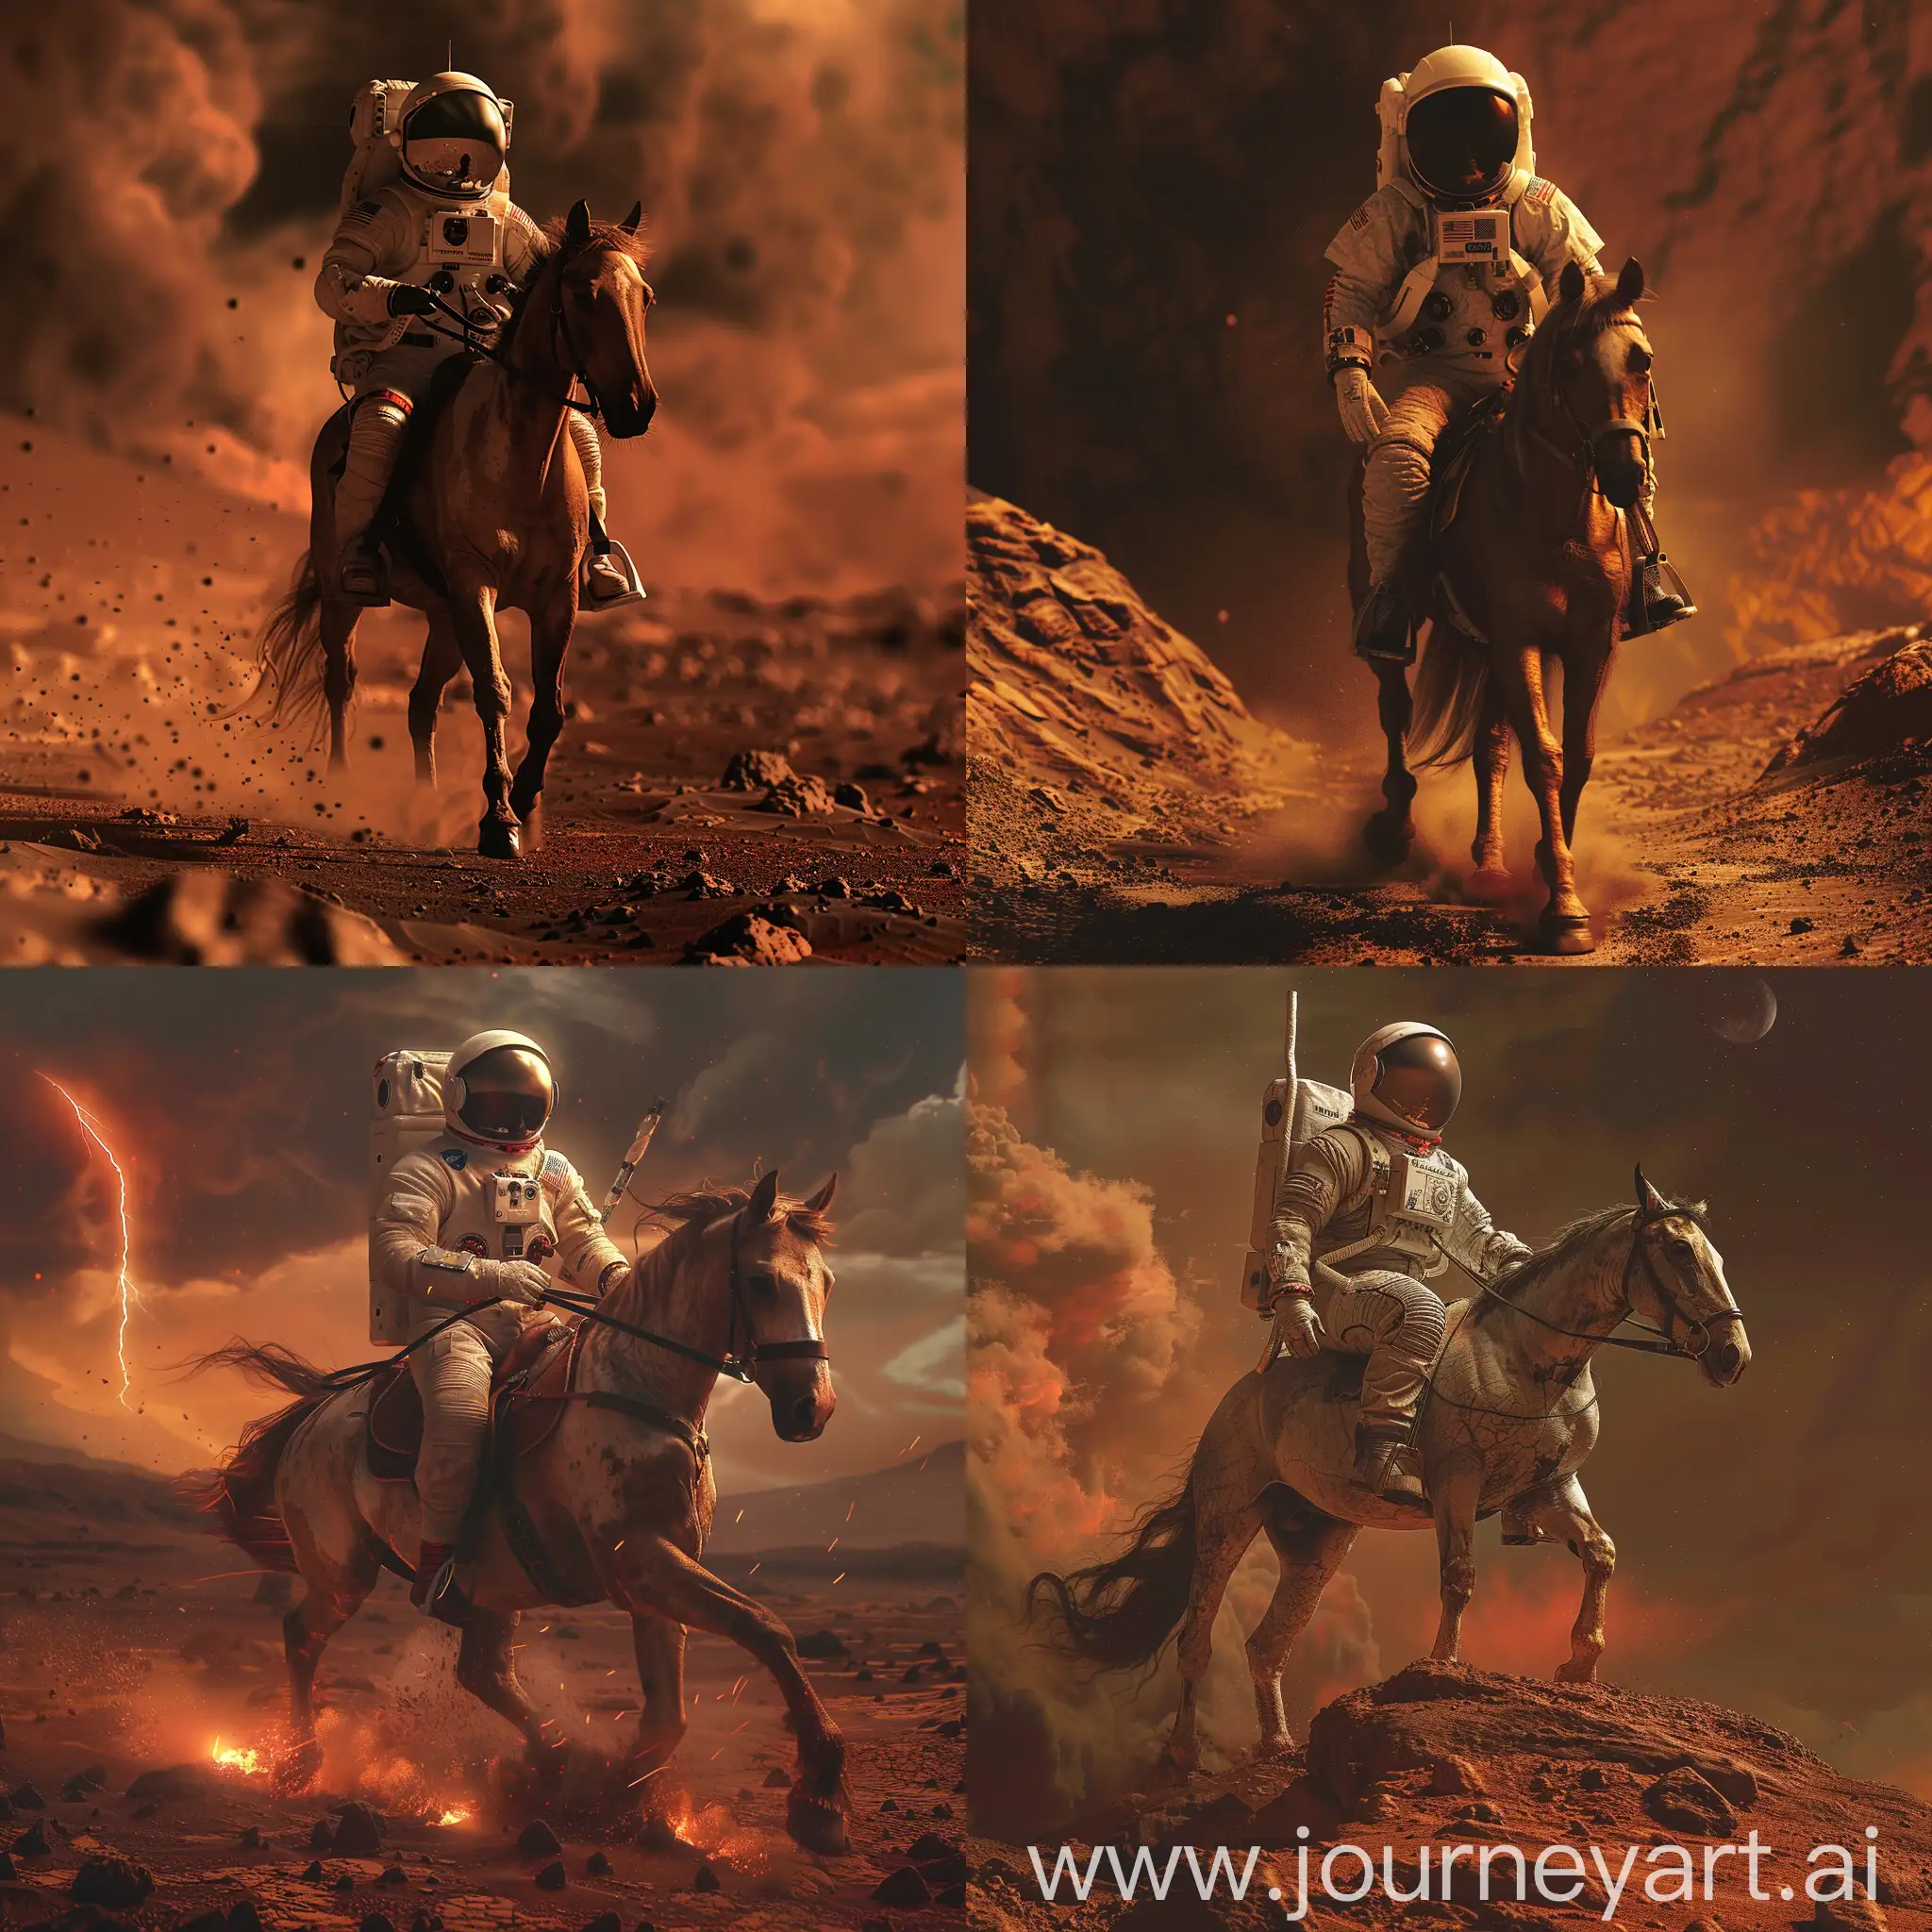 Astronaut-Riding-Horse-on-Mars-HD-Image-with-Dramatic-Lighting-and-Detailed-Depiction